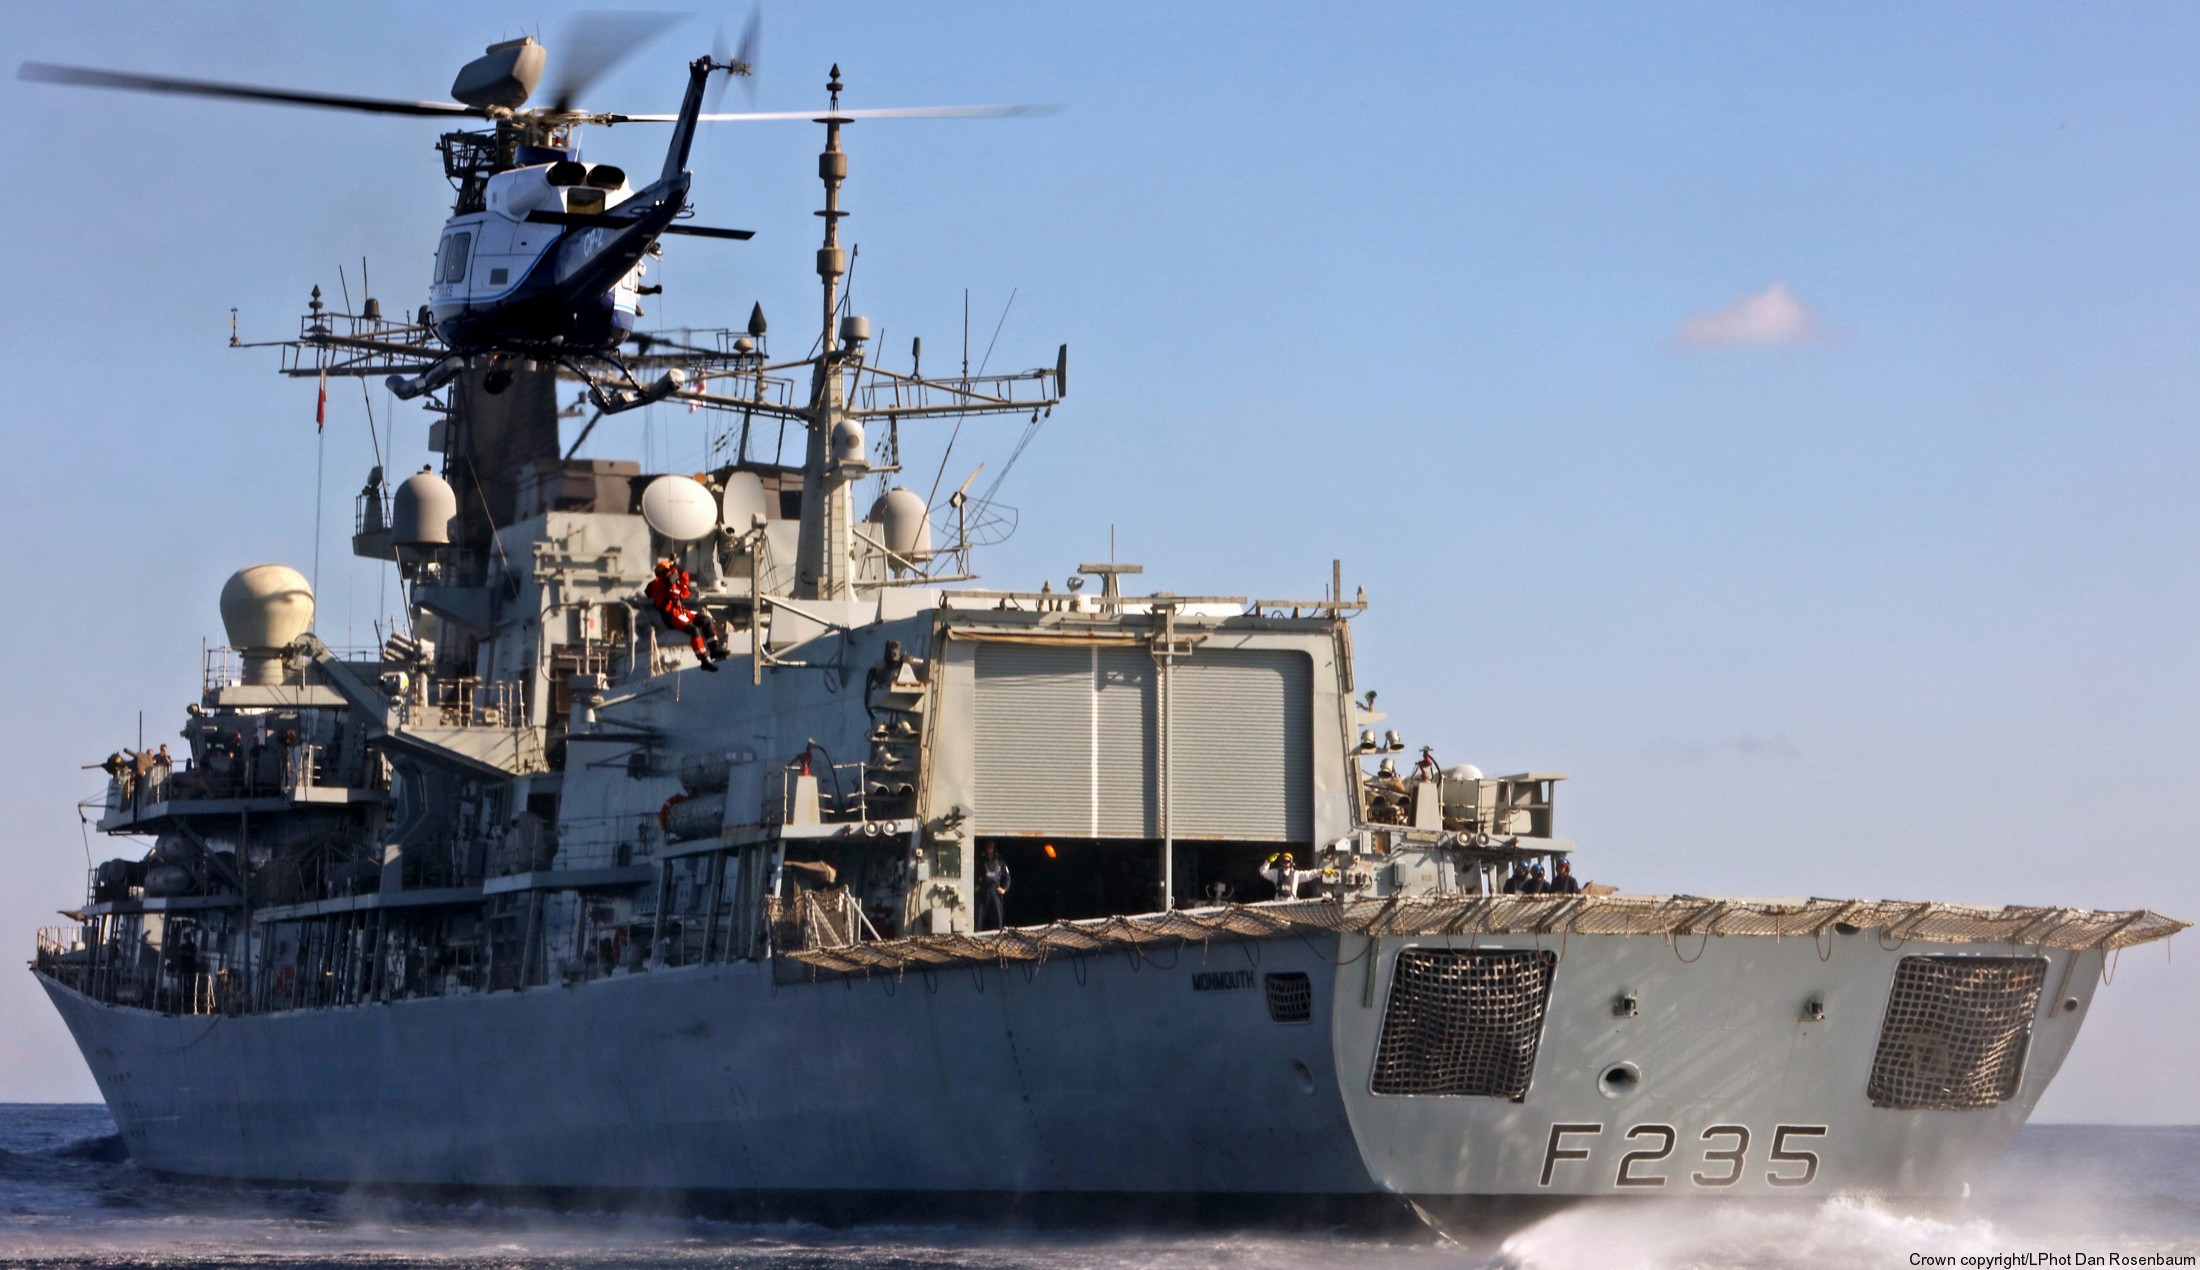 f-235 hms monmouth type 23 duke class guided missile frigate ffg royal navy 38